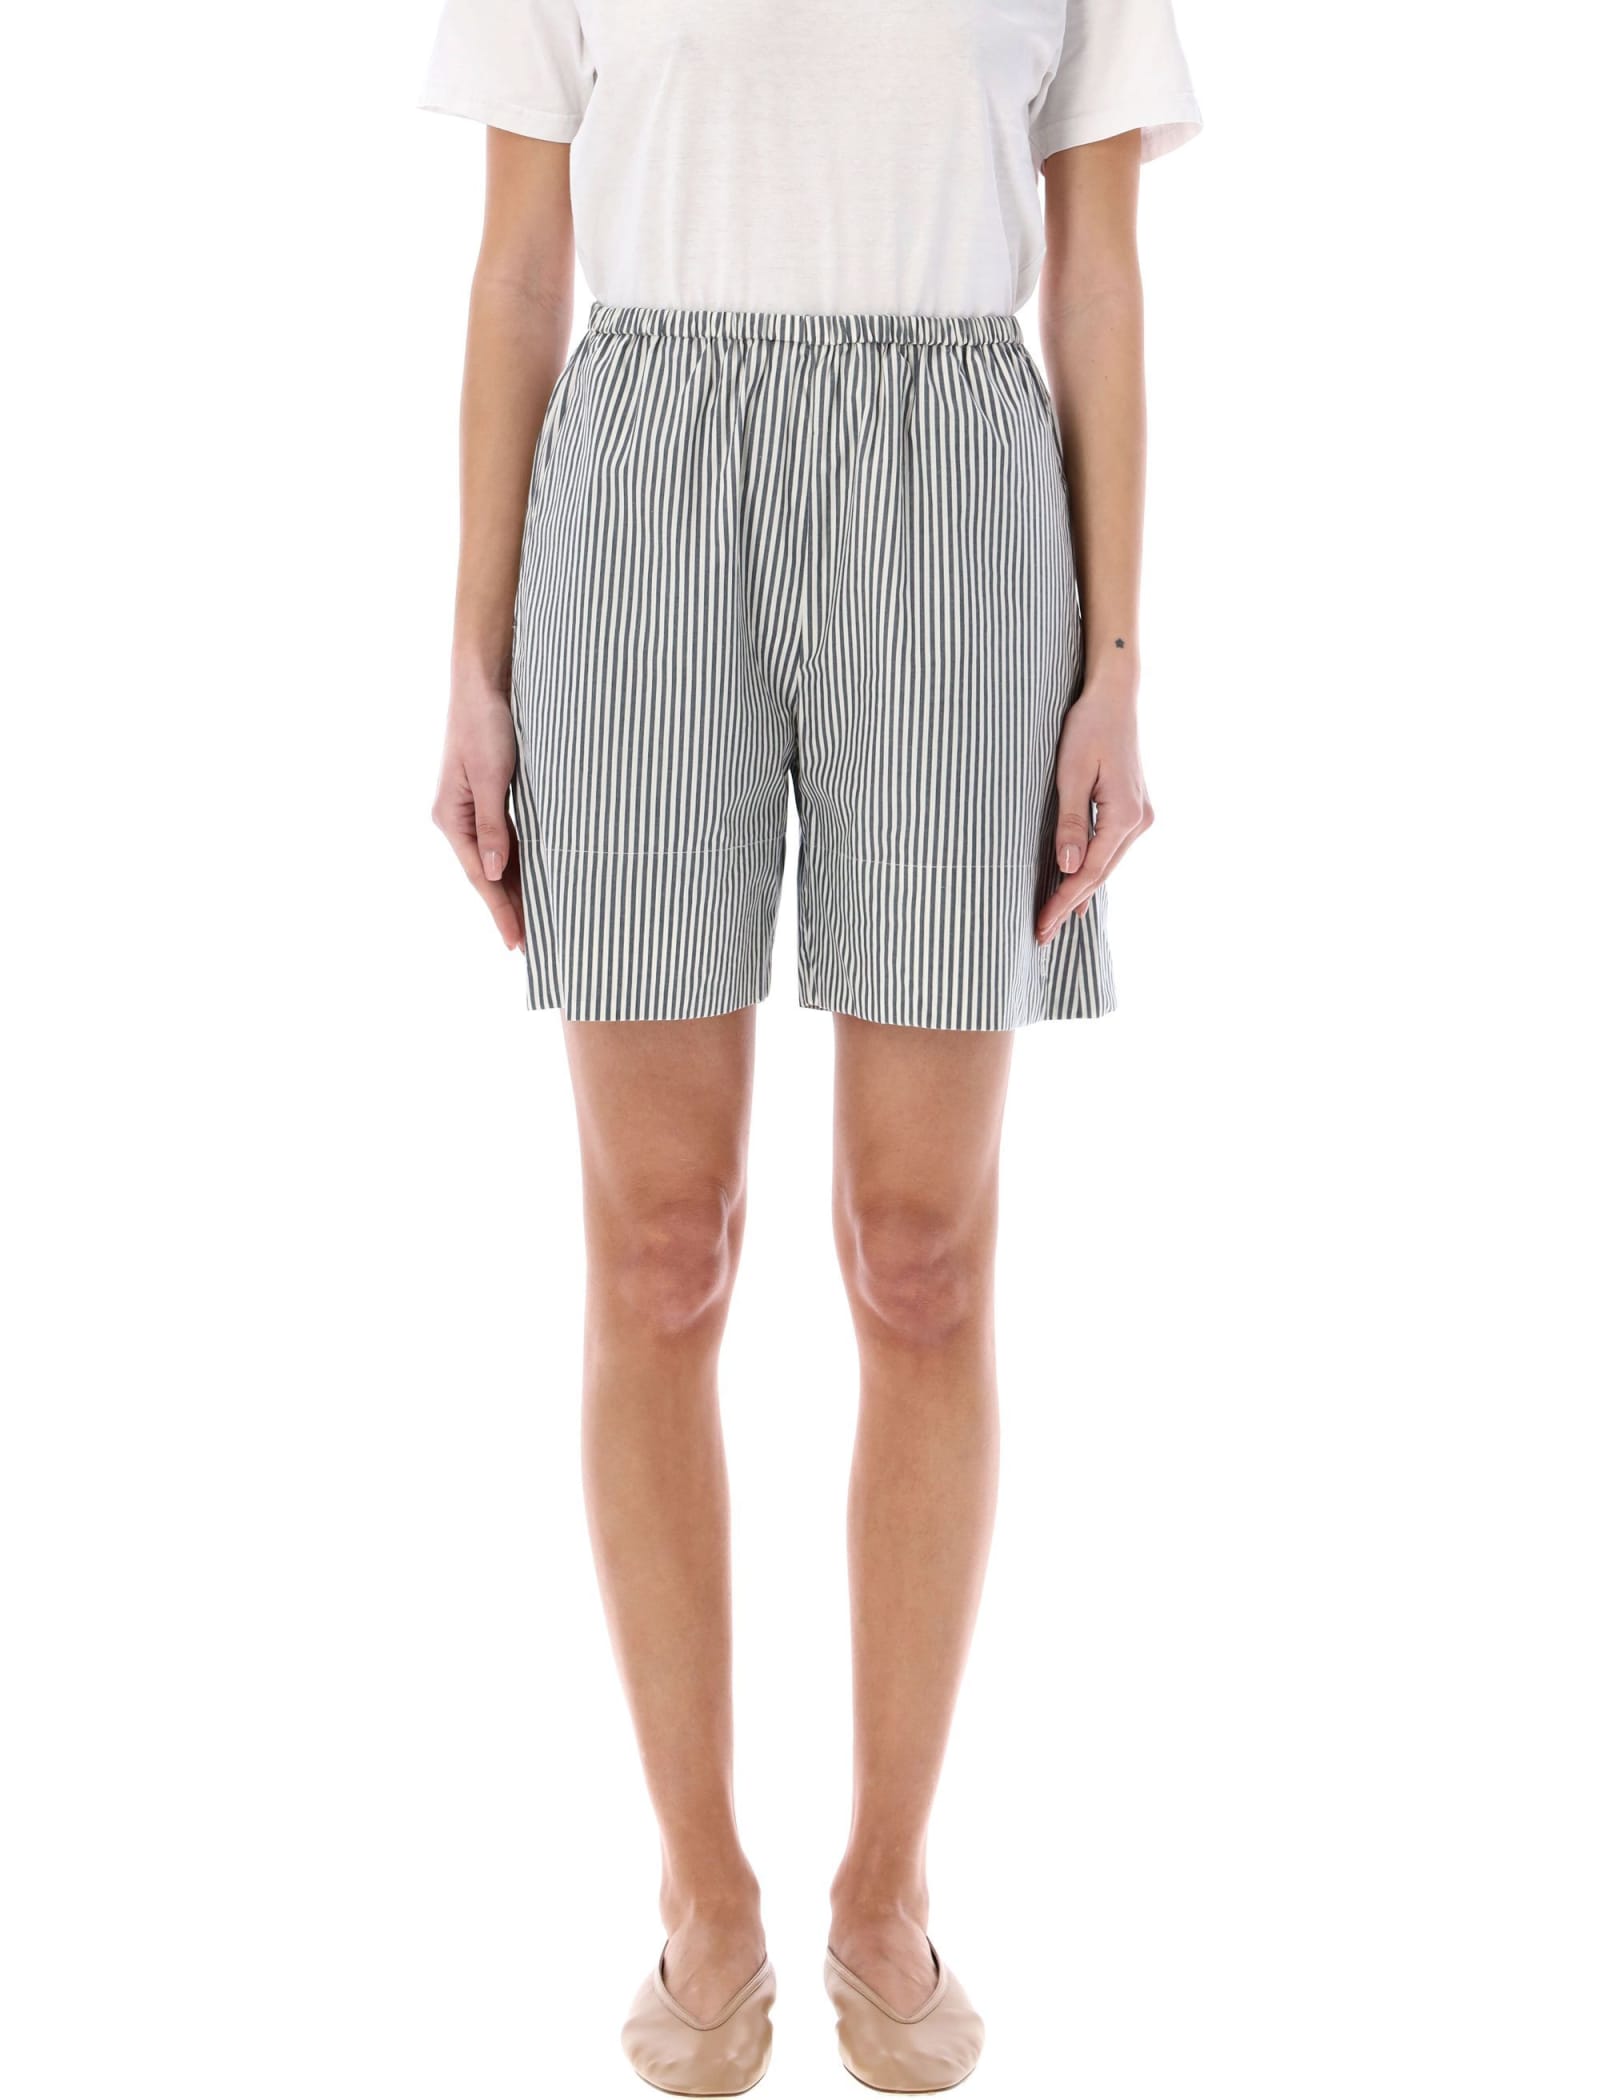 Siona Striped Shorts